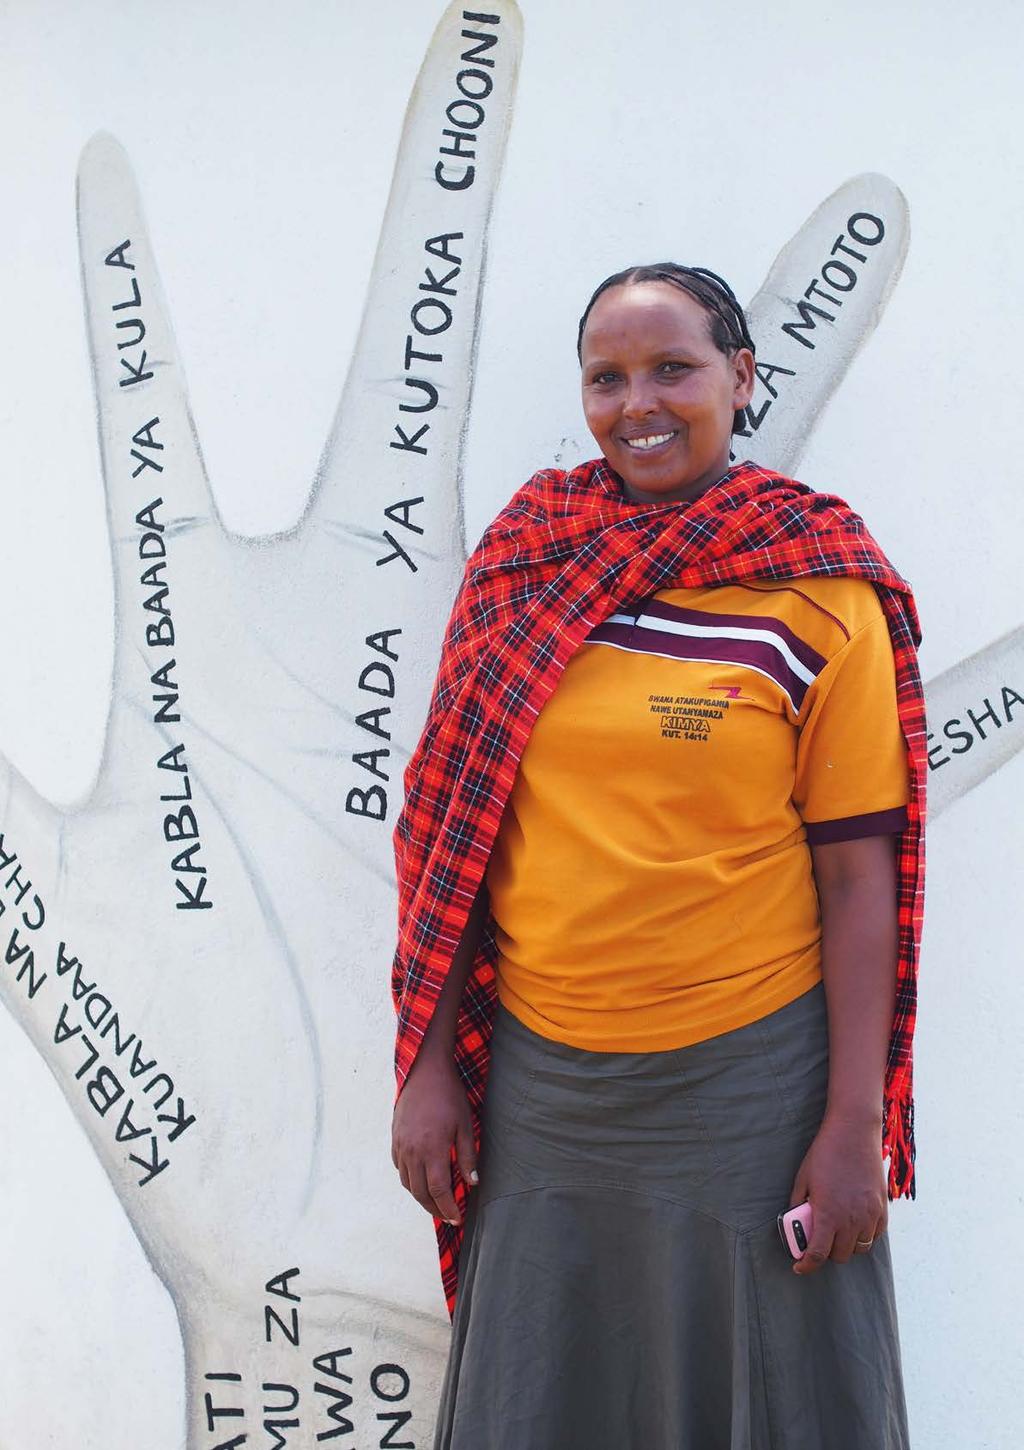 Ruth Francisco, 35, is a health promoter and treasurer of Kamau Group, a group of health promoters and